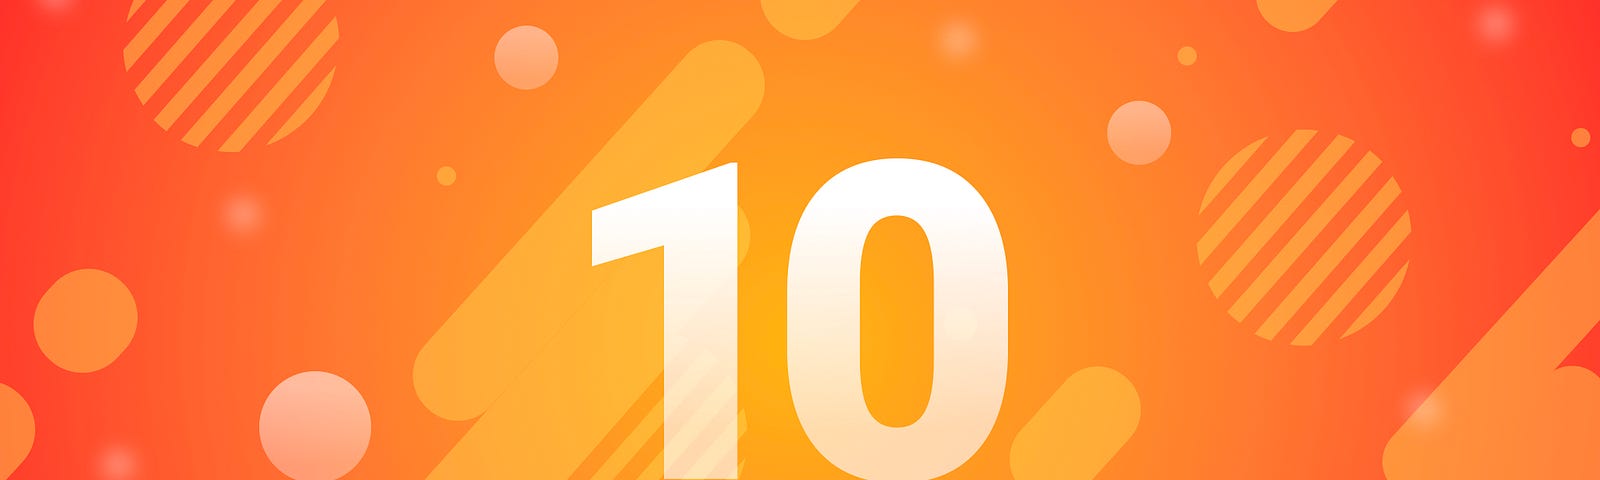 A number 10 overlaying a bright red graphic containing different shapes and patterns